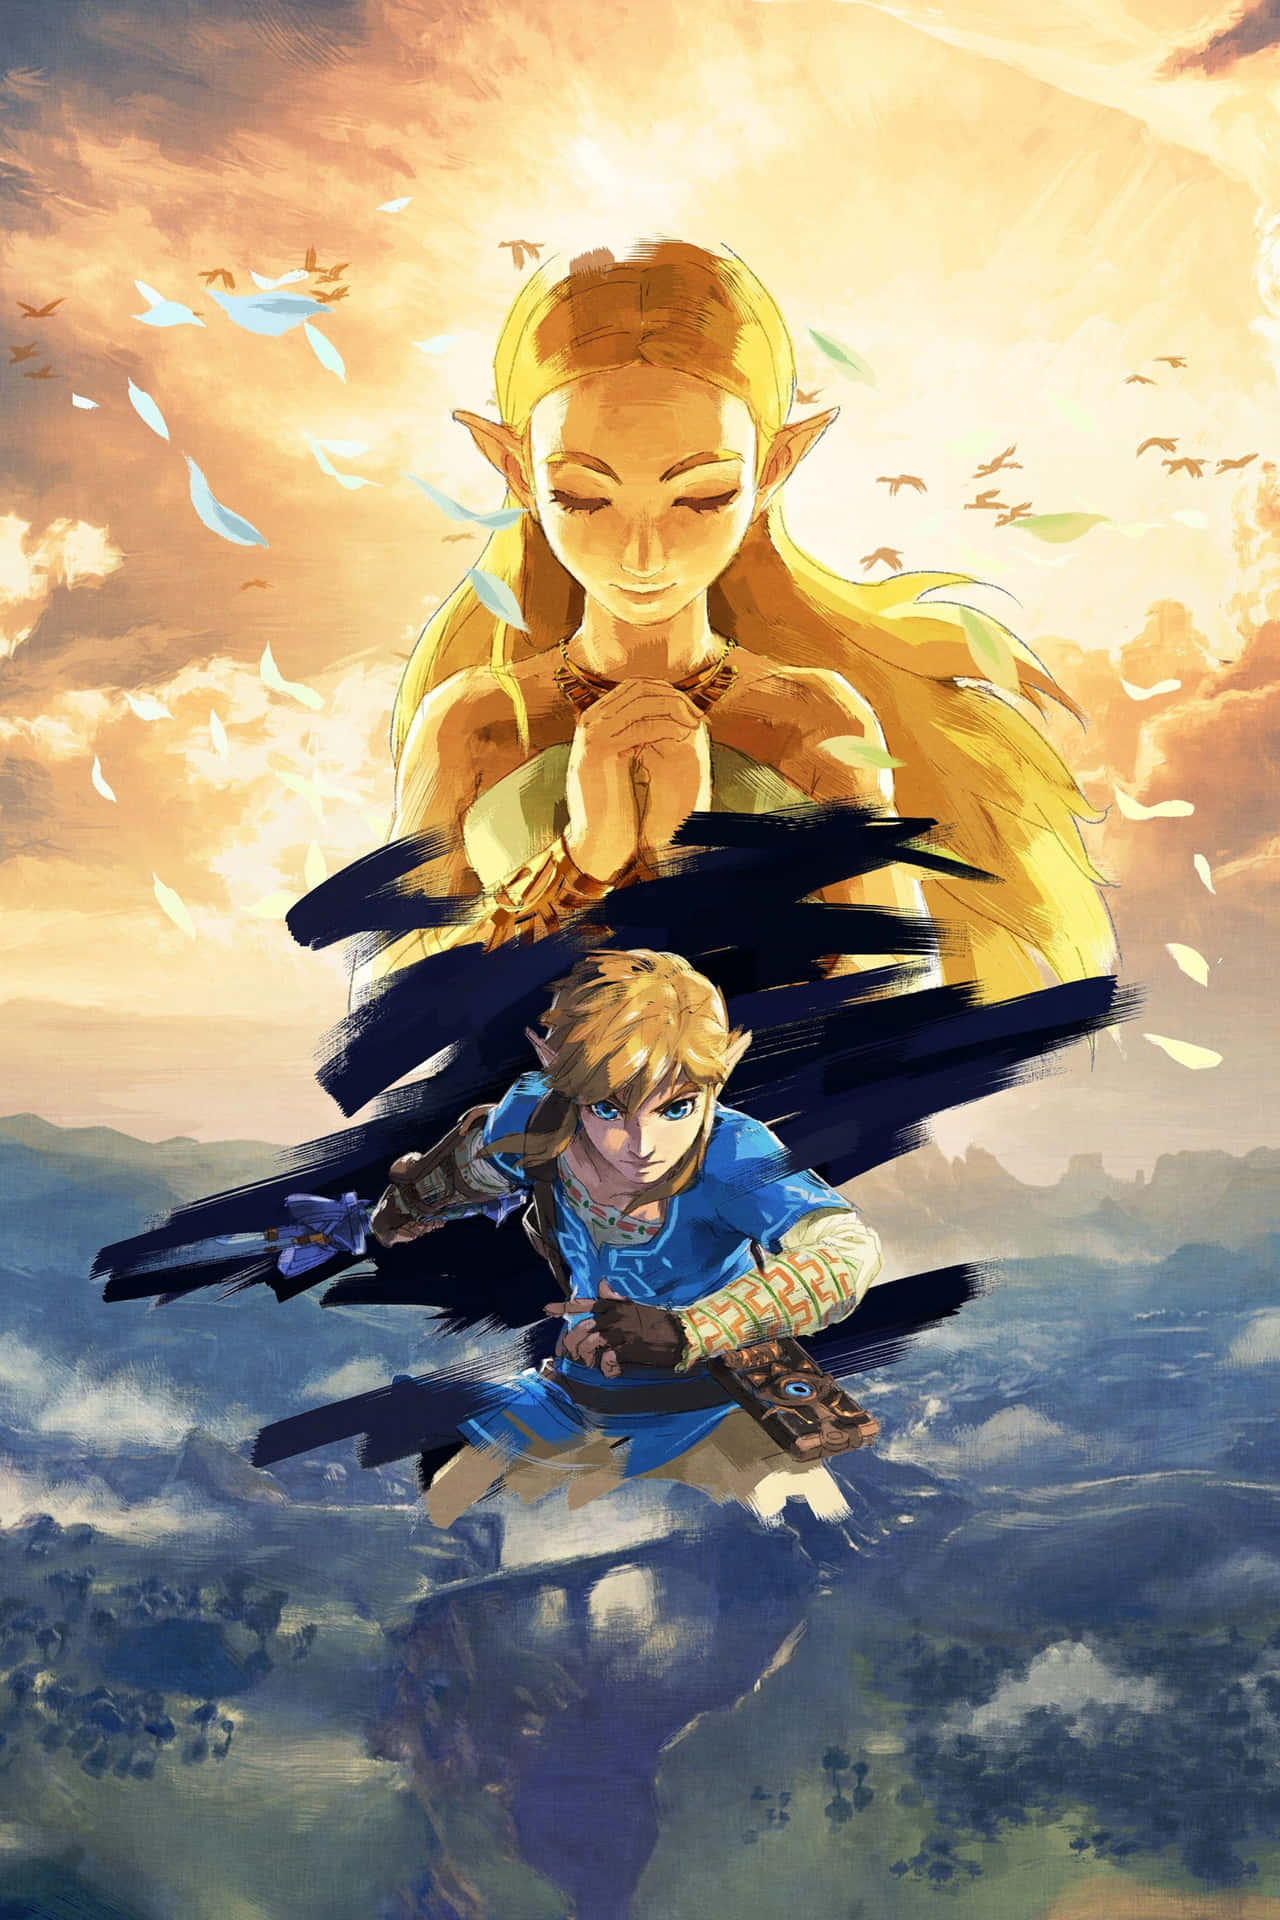 Artistic depiction of Link soaring through the air in Zelda Breath Of The Wild 4k Wallpaper